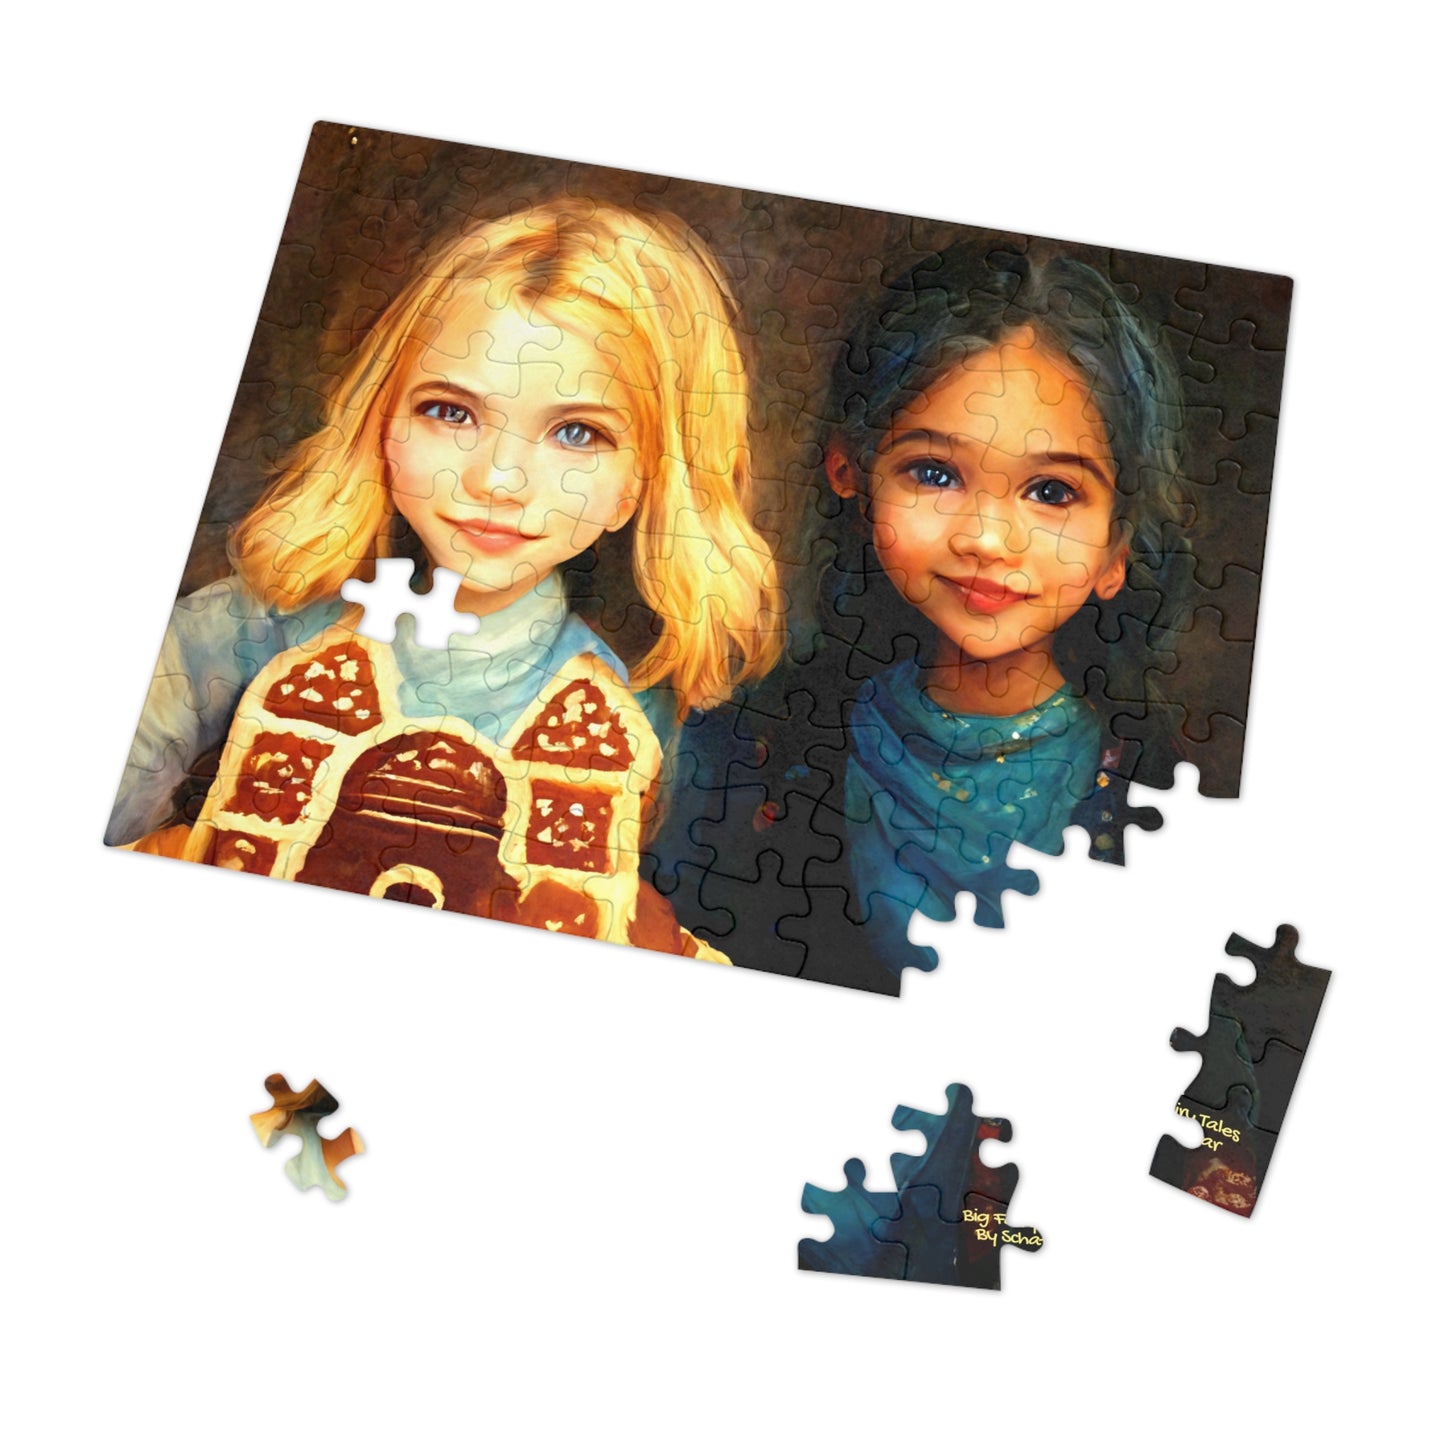 Big Fairy Tales By Schatar - Hansel And Gretel Jigsaw Puzzle